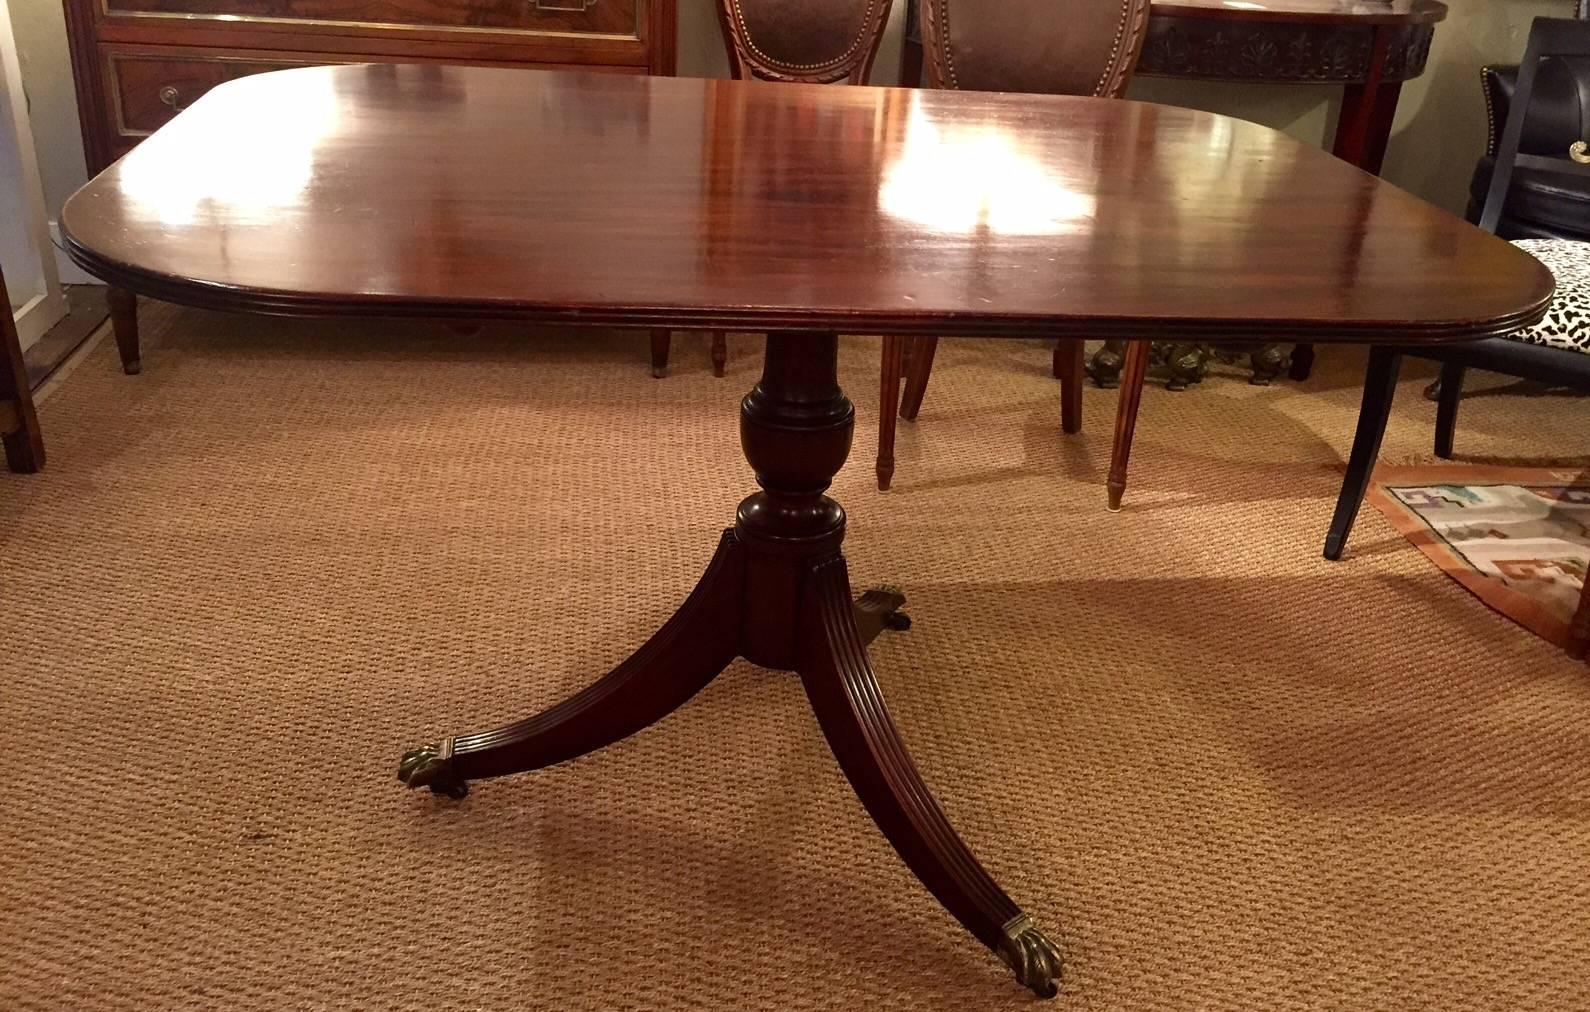 English Regency mahogany tilt-top breakfast table, circa 1840, the rectangular top with rounded corners and a reeded edge, resting on a turned baluster and a tripod base with reeded saber legs ending in brass paw feet with casters.